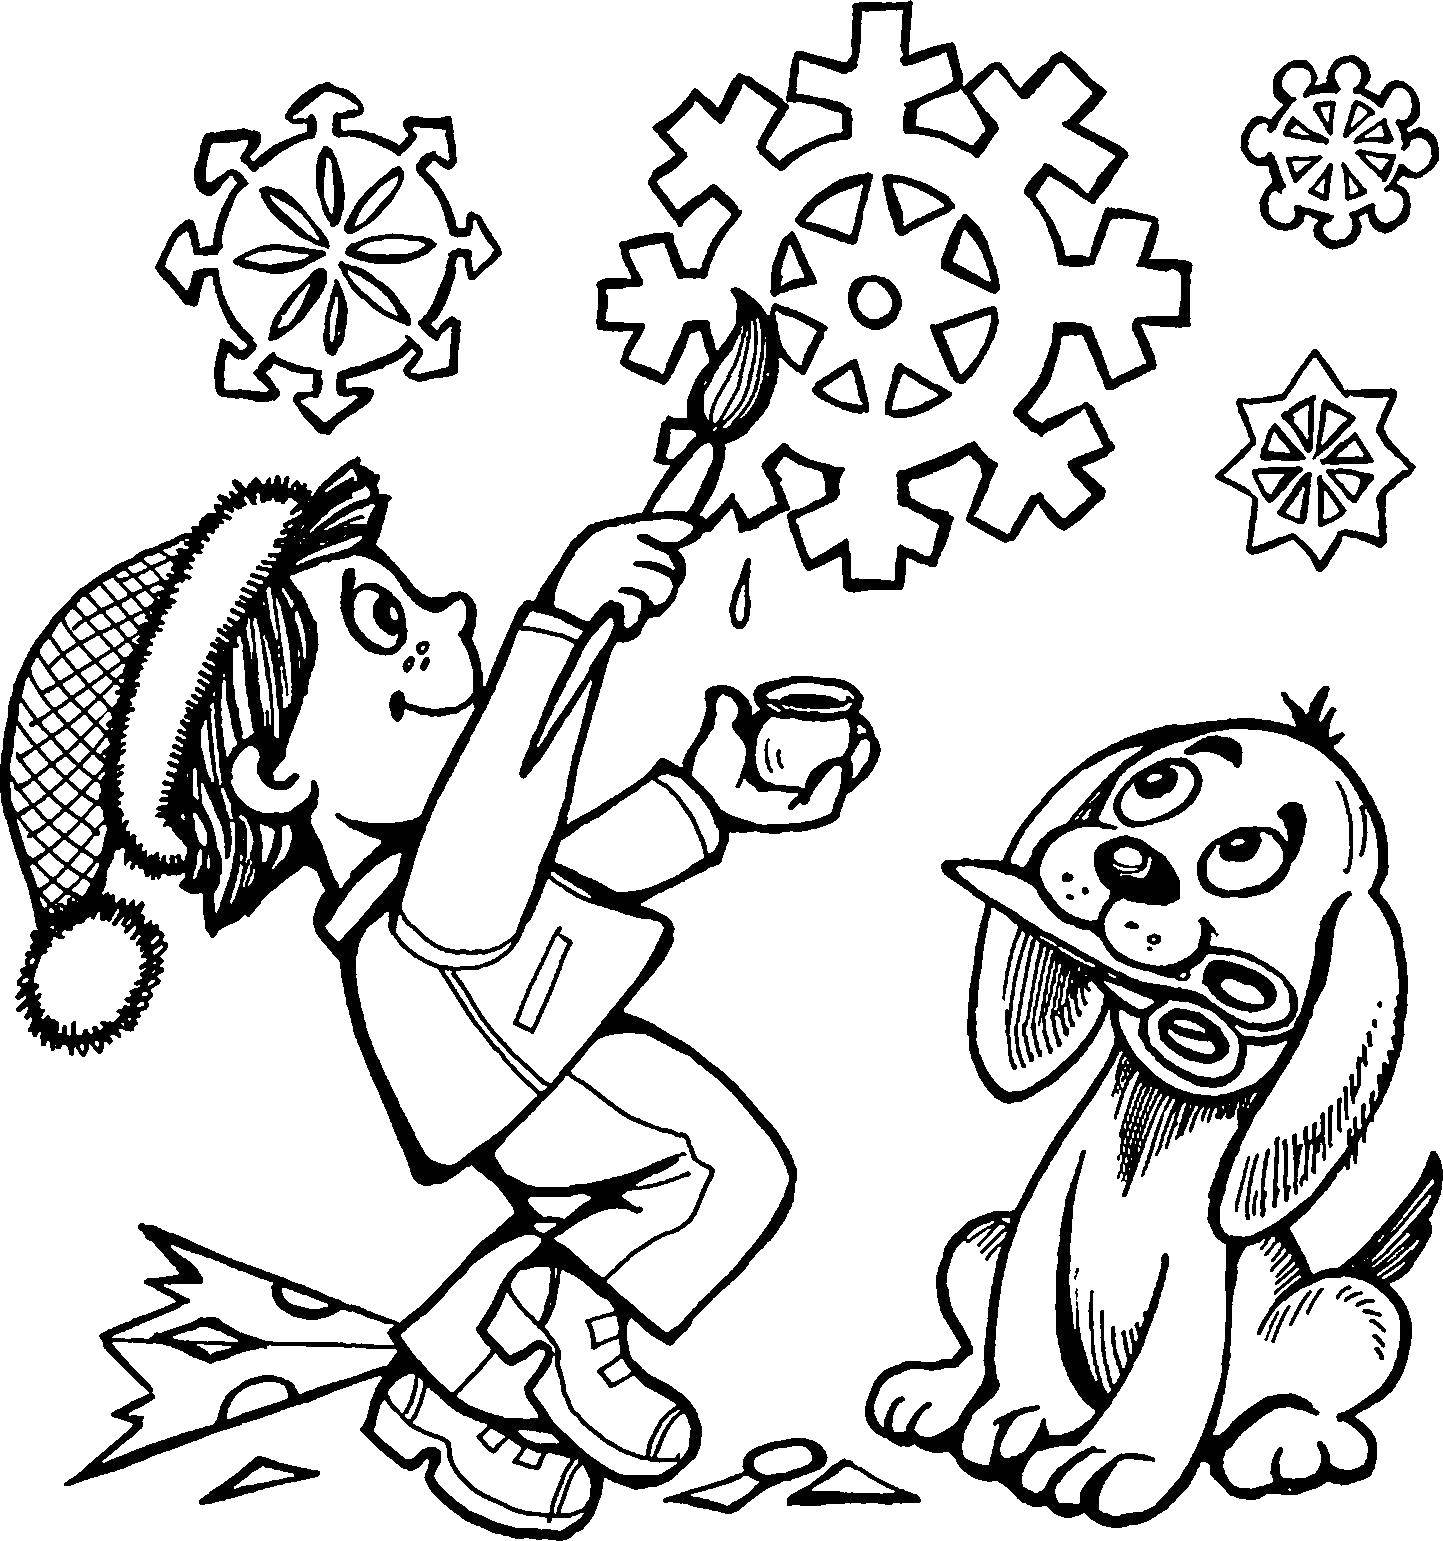 Coloring Draw snowflakes. Category snowflakes. Tags:  Snowflakes, snow, winter.